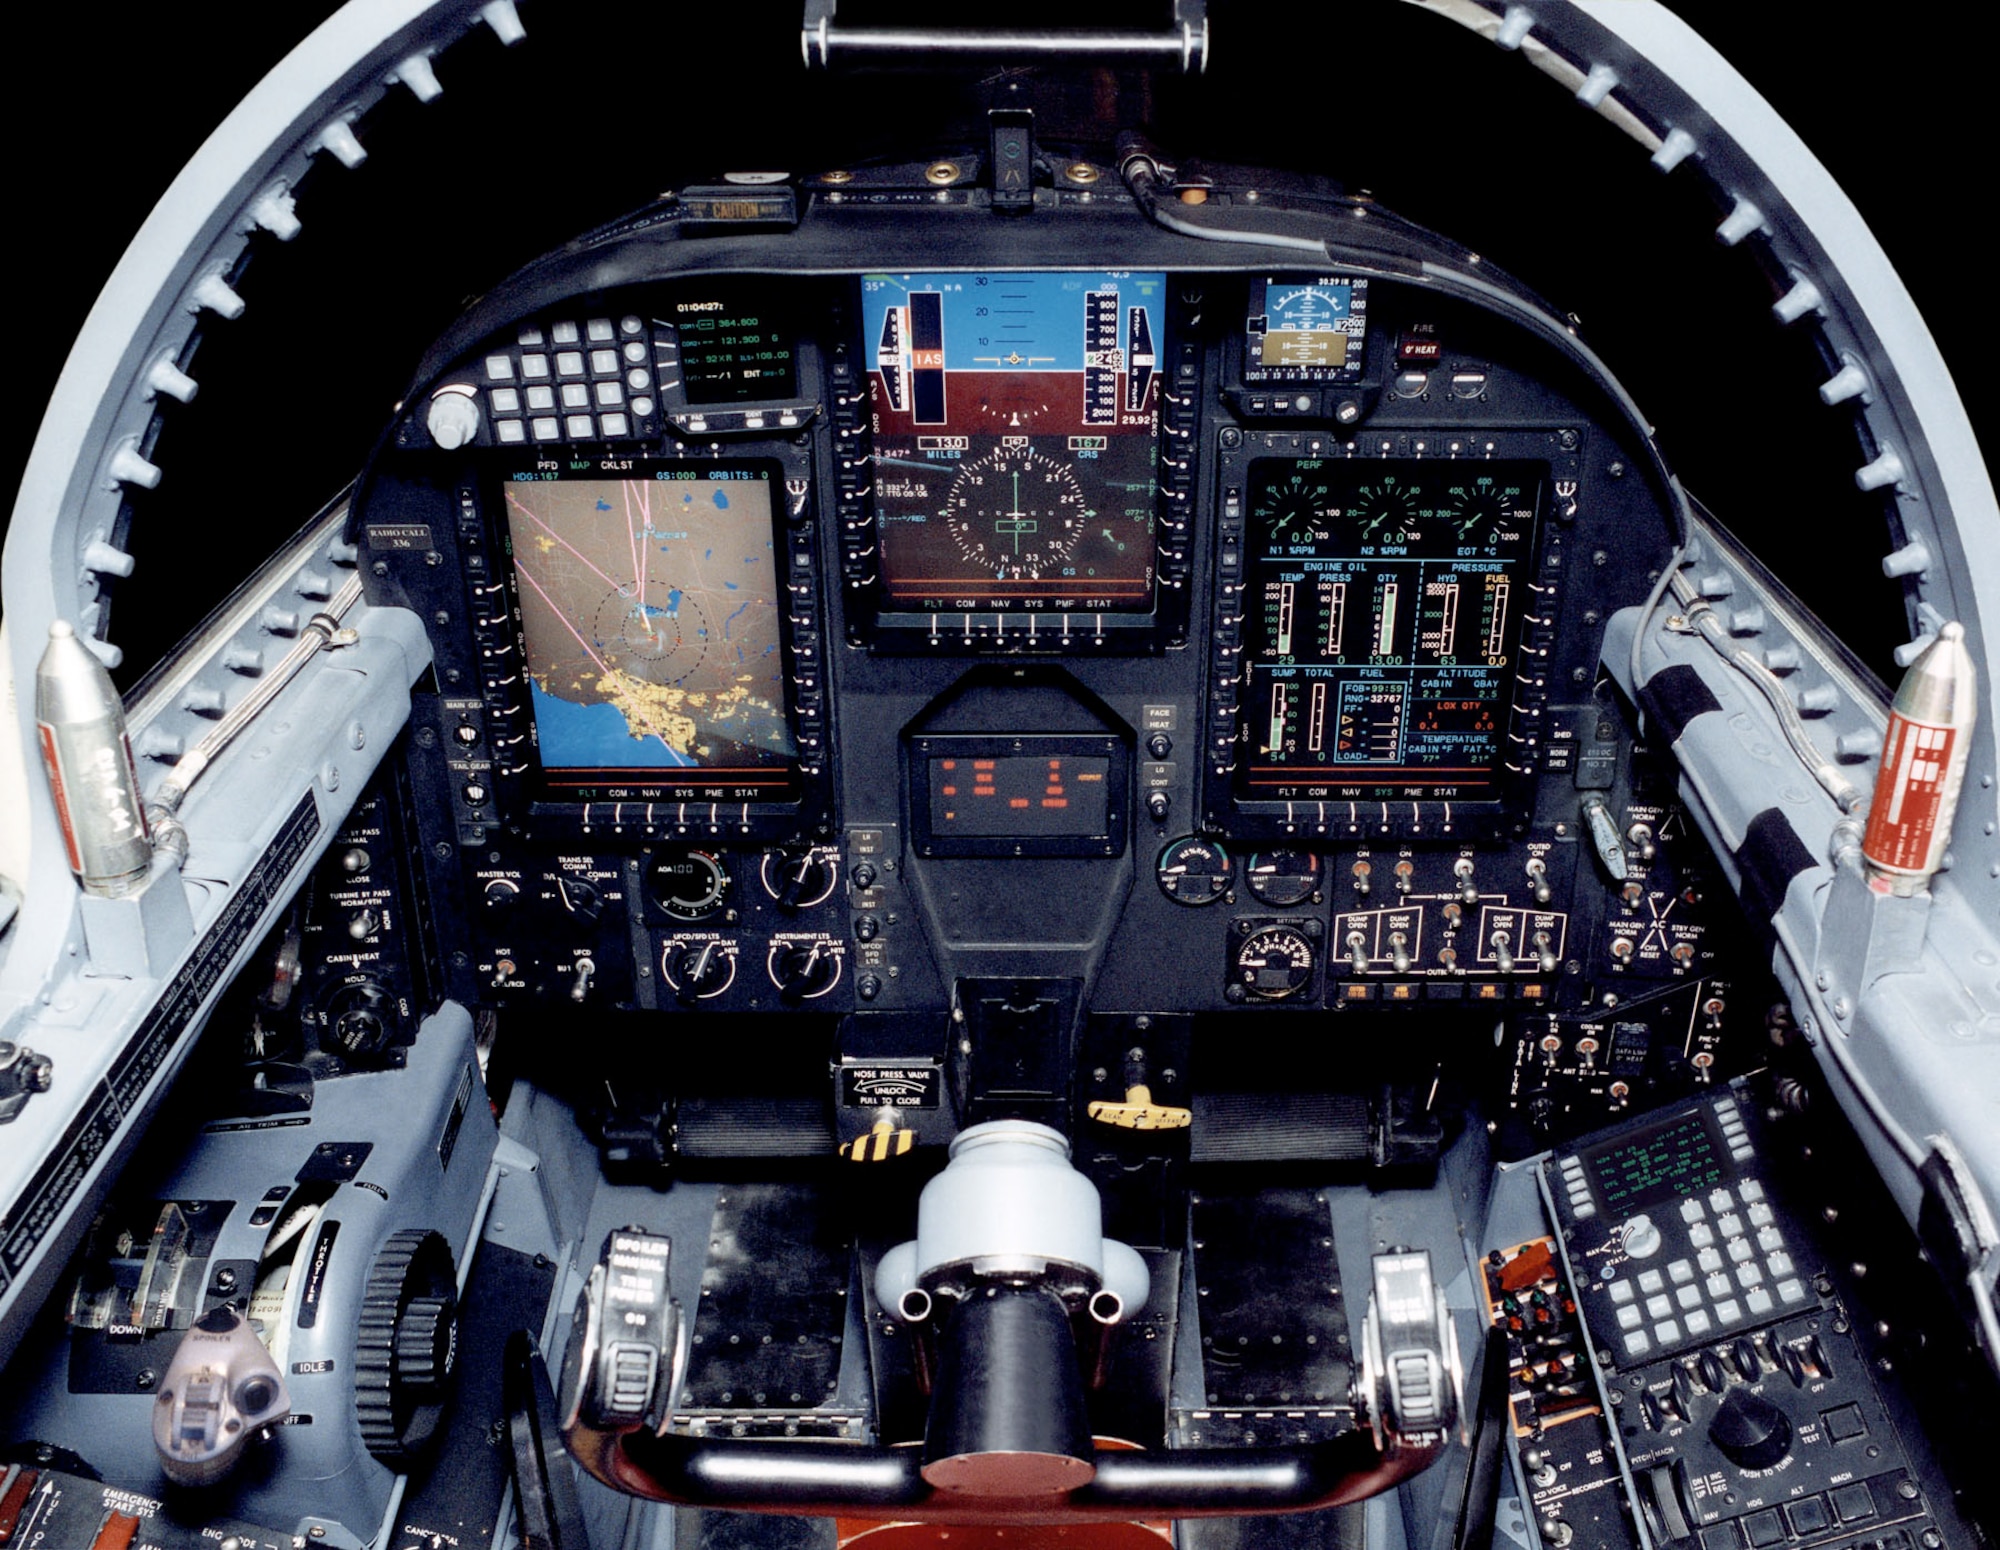 The U-2S’s “glass cockpit” uses modern displays and the latest electronics to keep the pilot informed. (U.S. Air Force photo)